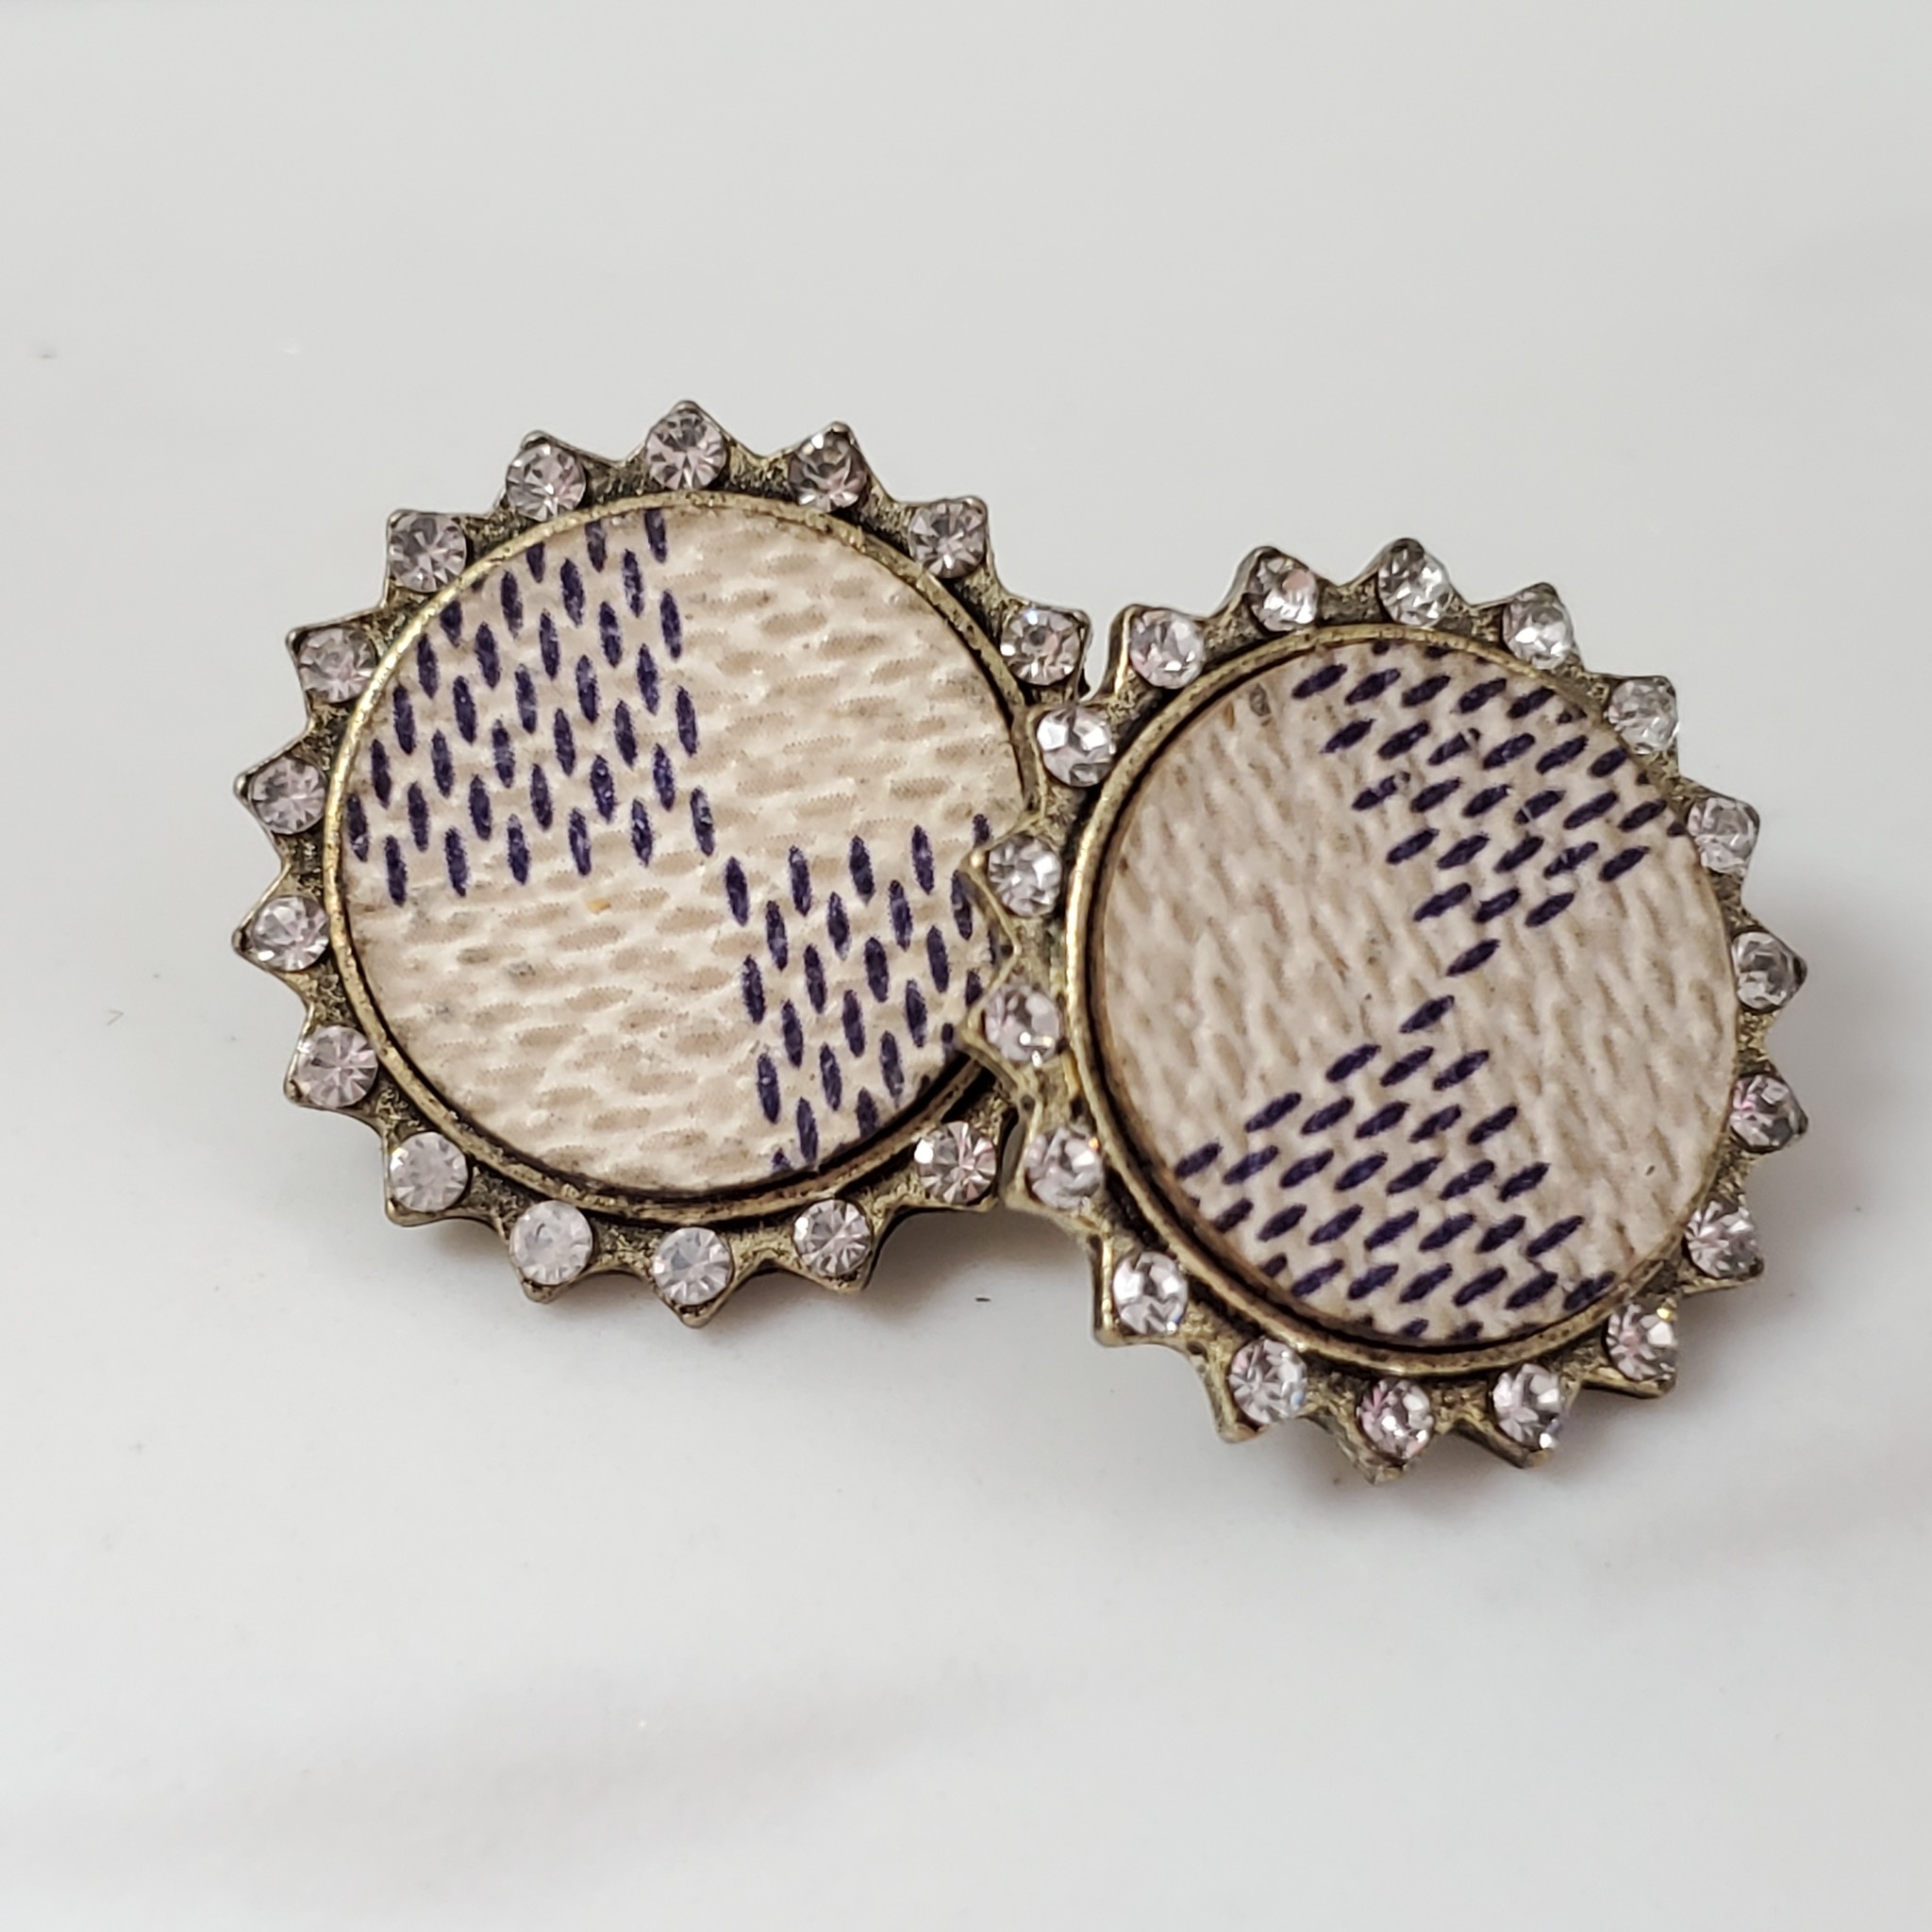 Keep It Gypsy Upcycled LV Damier Azur patch set into stud earrings -  Eclections Boutique